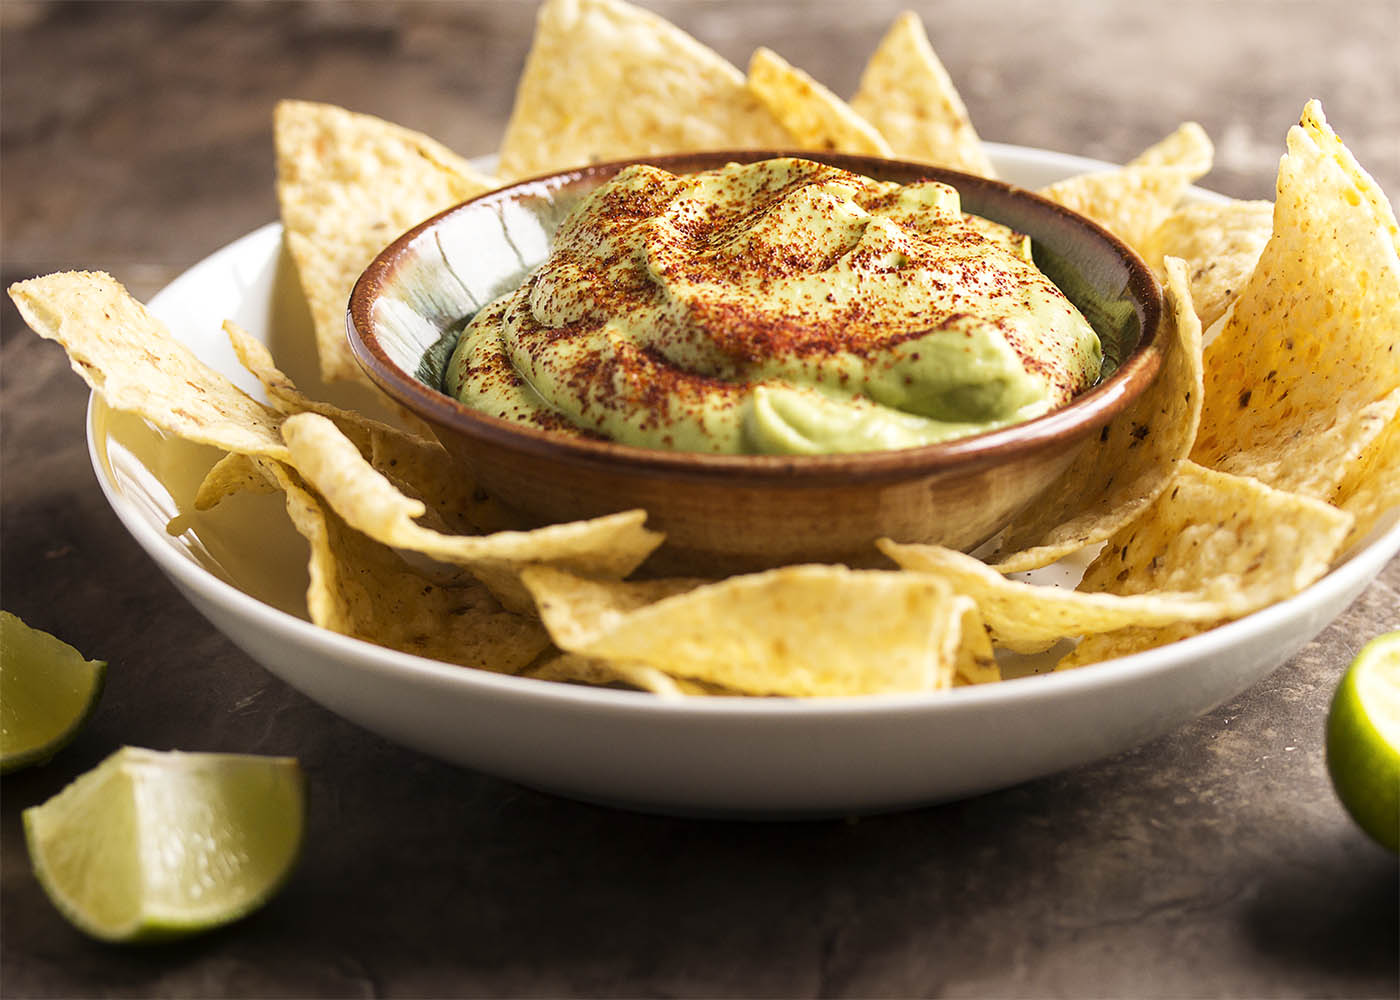 Tangy Lime Avocado Crema - Avocados are pureed with lime juice and a touch of sour cream in this Avocado Crema. Great as a taco topping, a sauce, or a dip! | justalittlebitofbacon.com